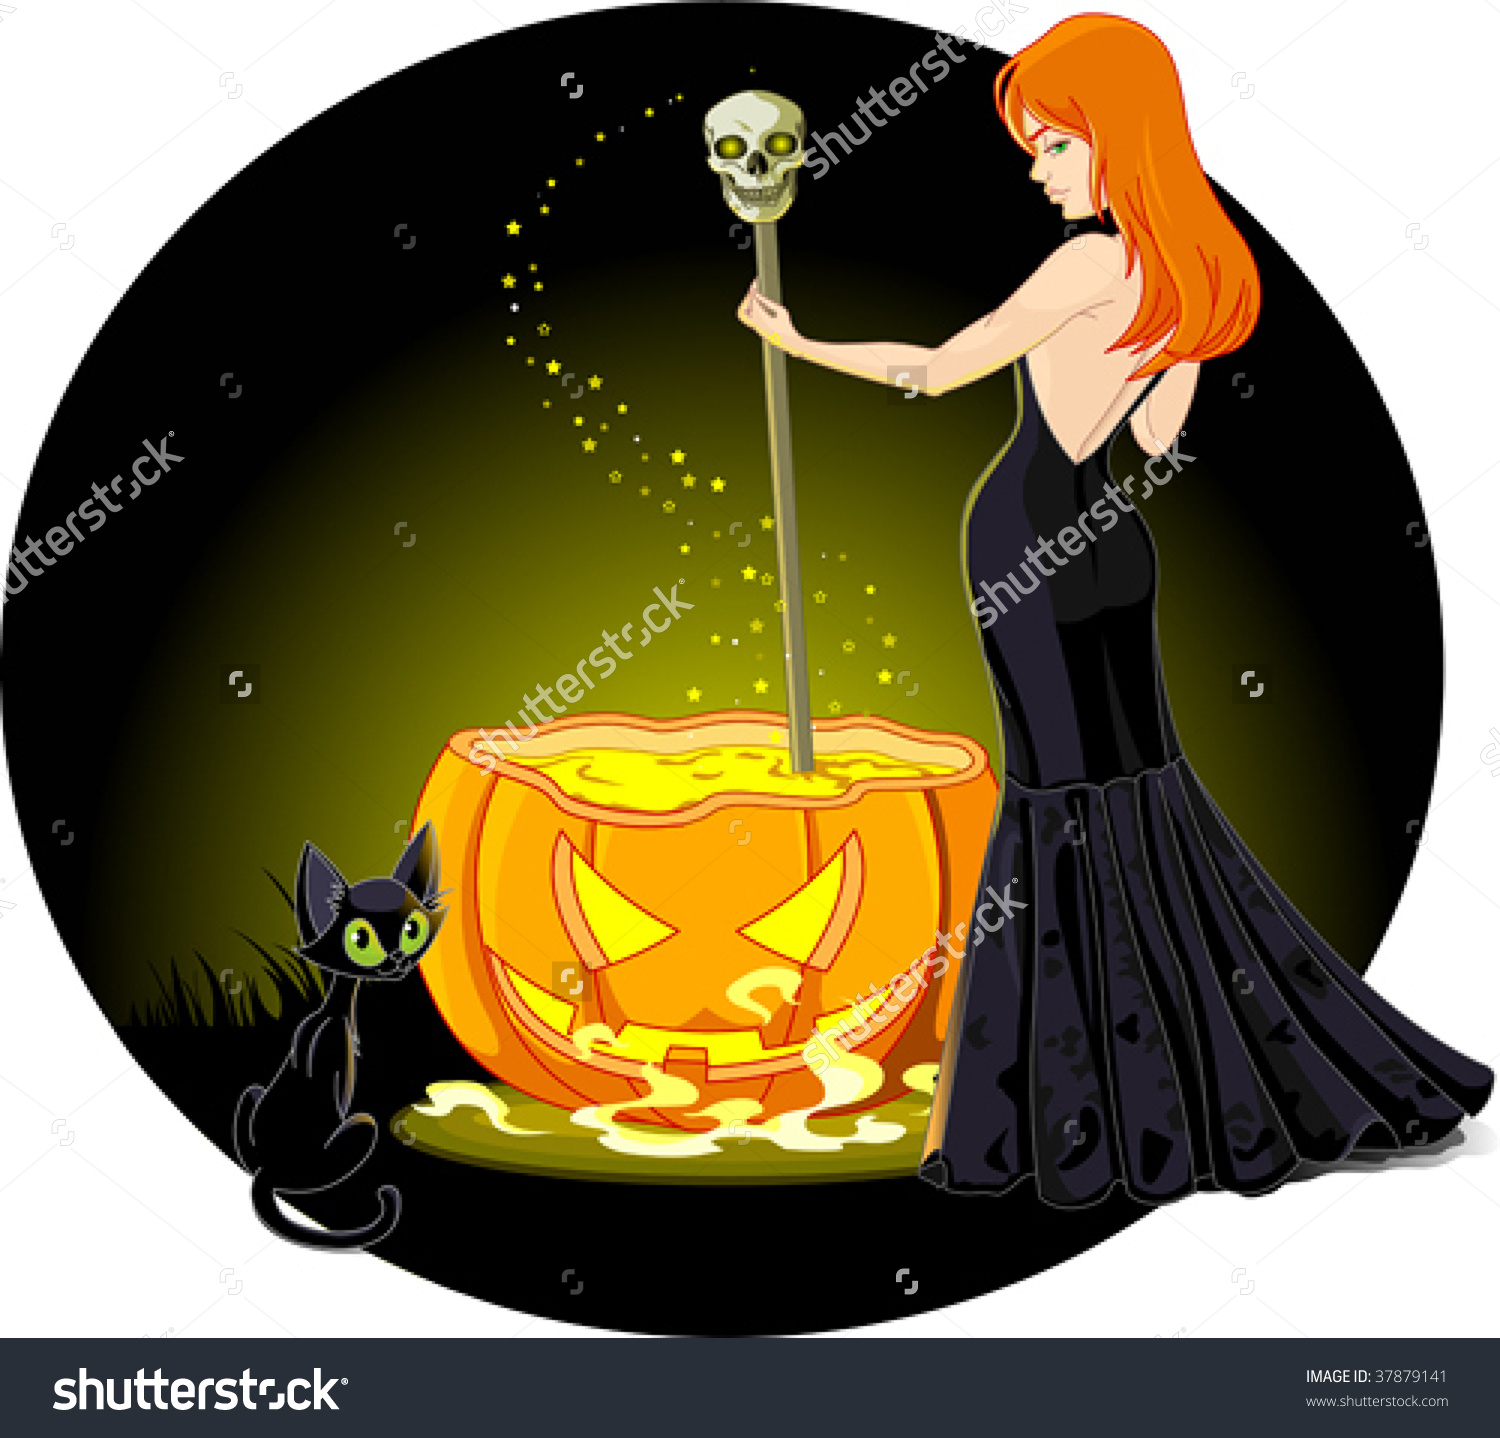 Sexy Witch Mixes Potion Her Cauldron Stock Vector 37879141.